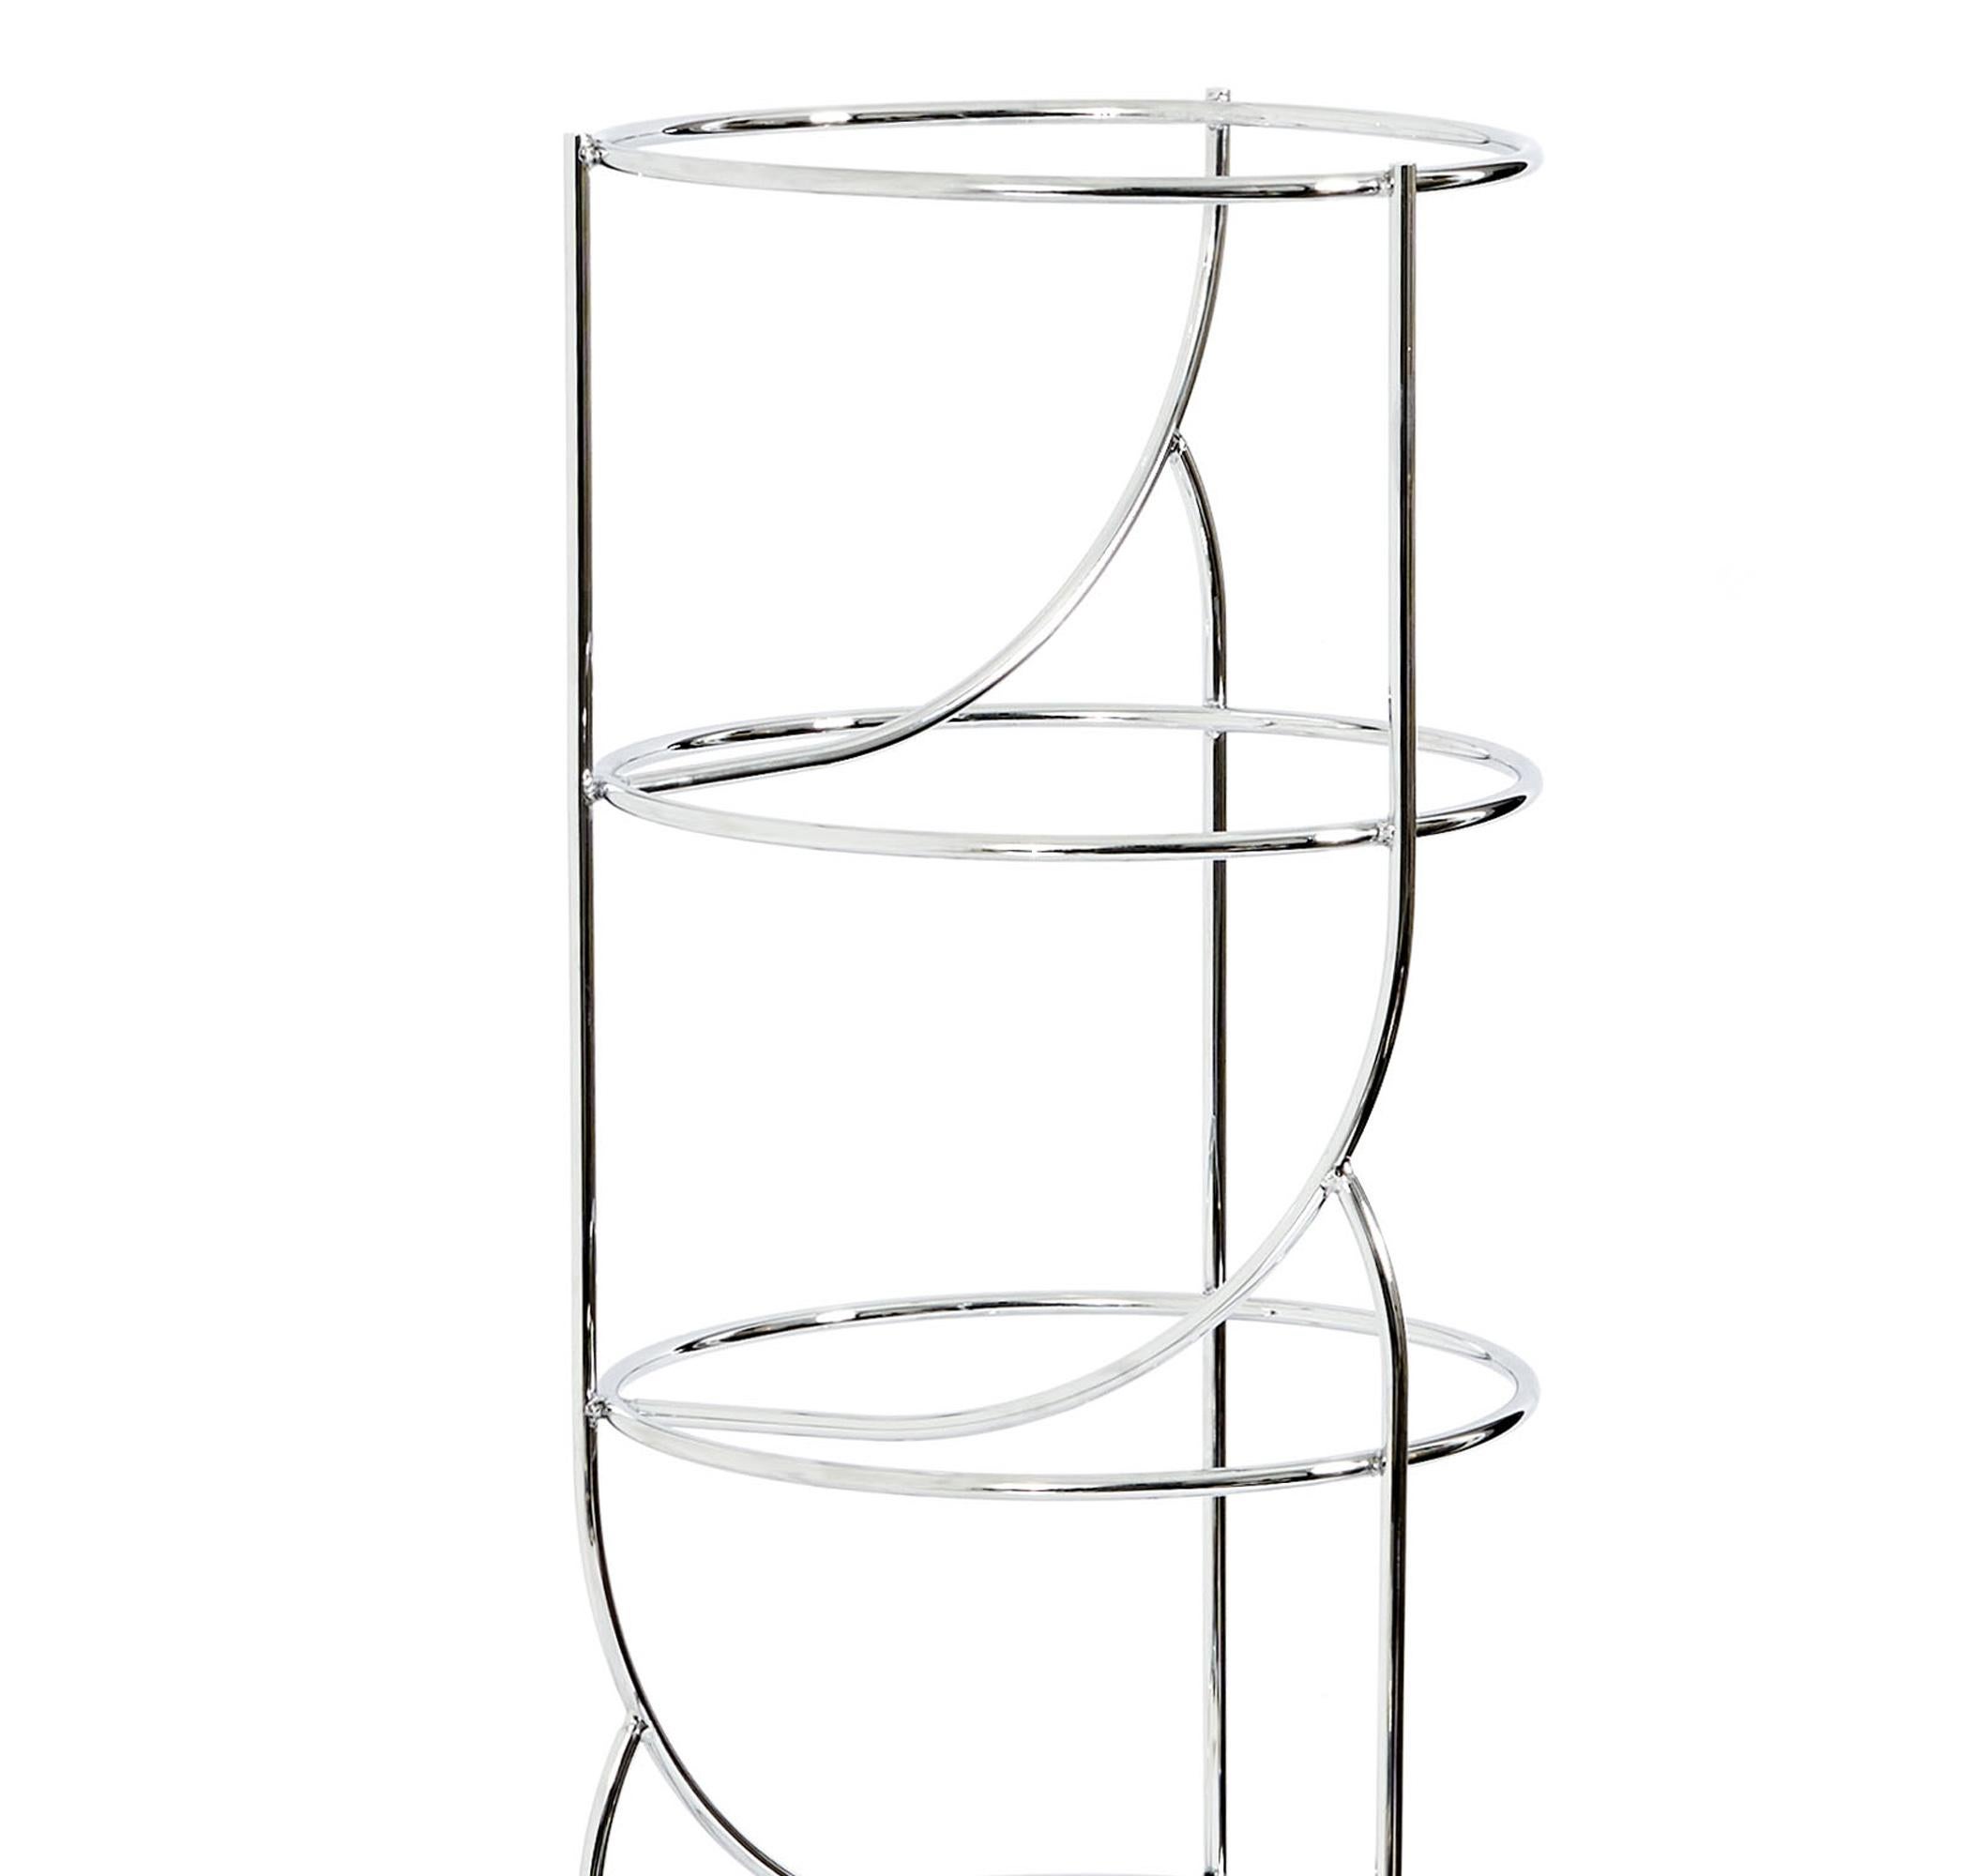 Modern Contemporary steel shelf tower, repositionable mirrored shelves made in Italy